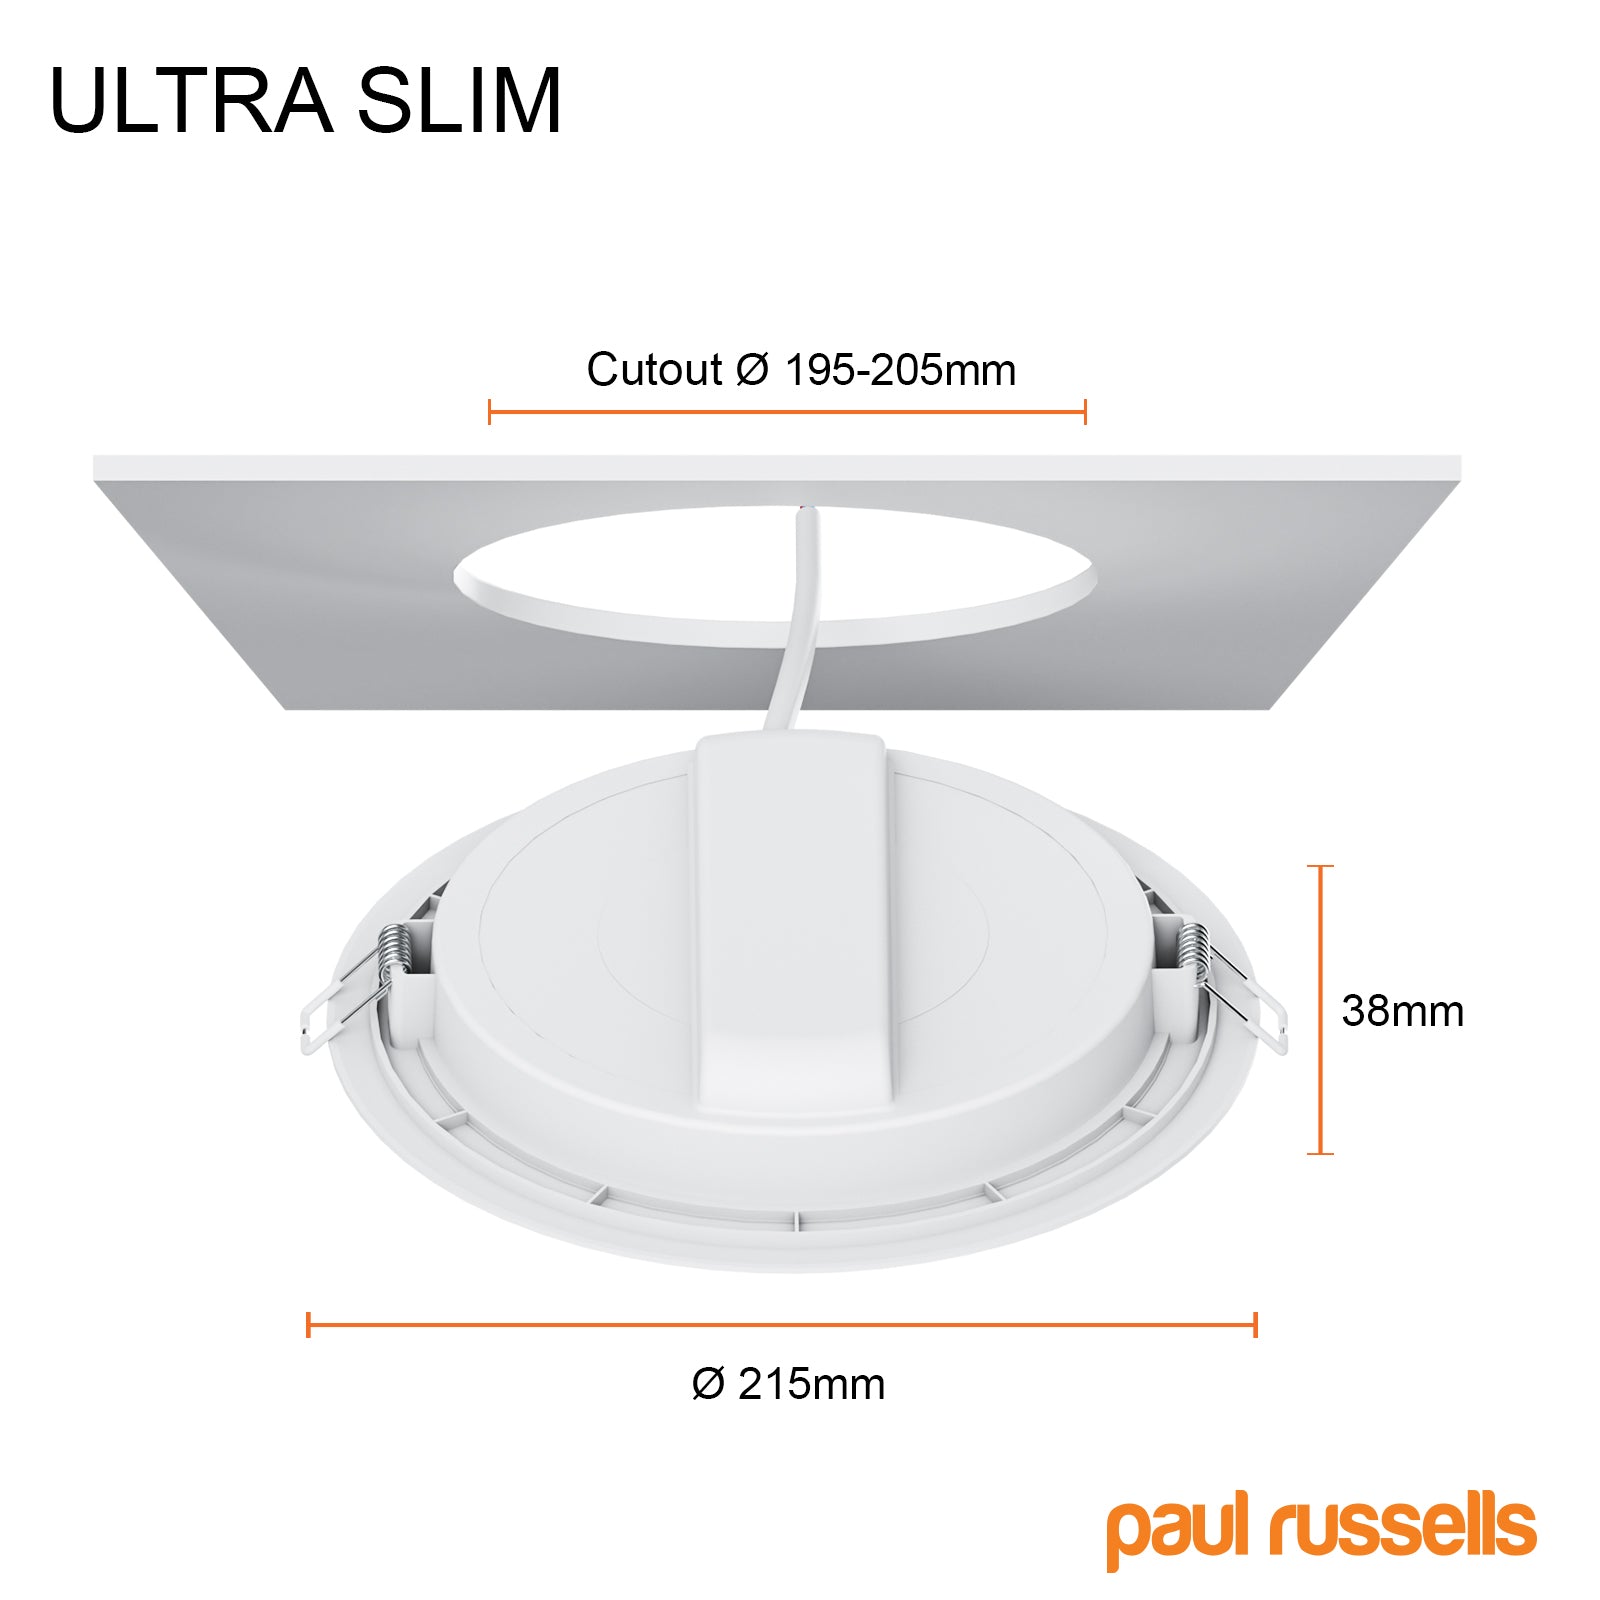 24W, LED Round Ceiling Downlights, 2450 Lumens, 4000K Cool White, Non-Dimmable Panel Spotlights